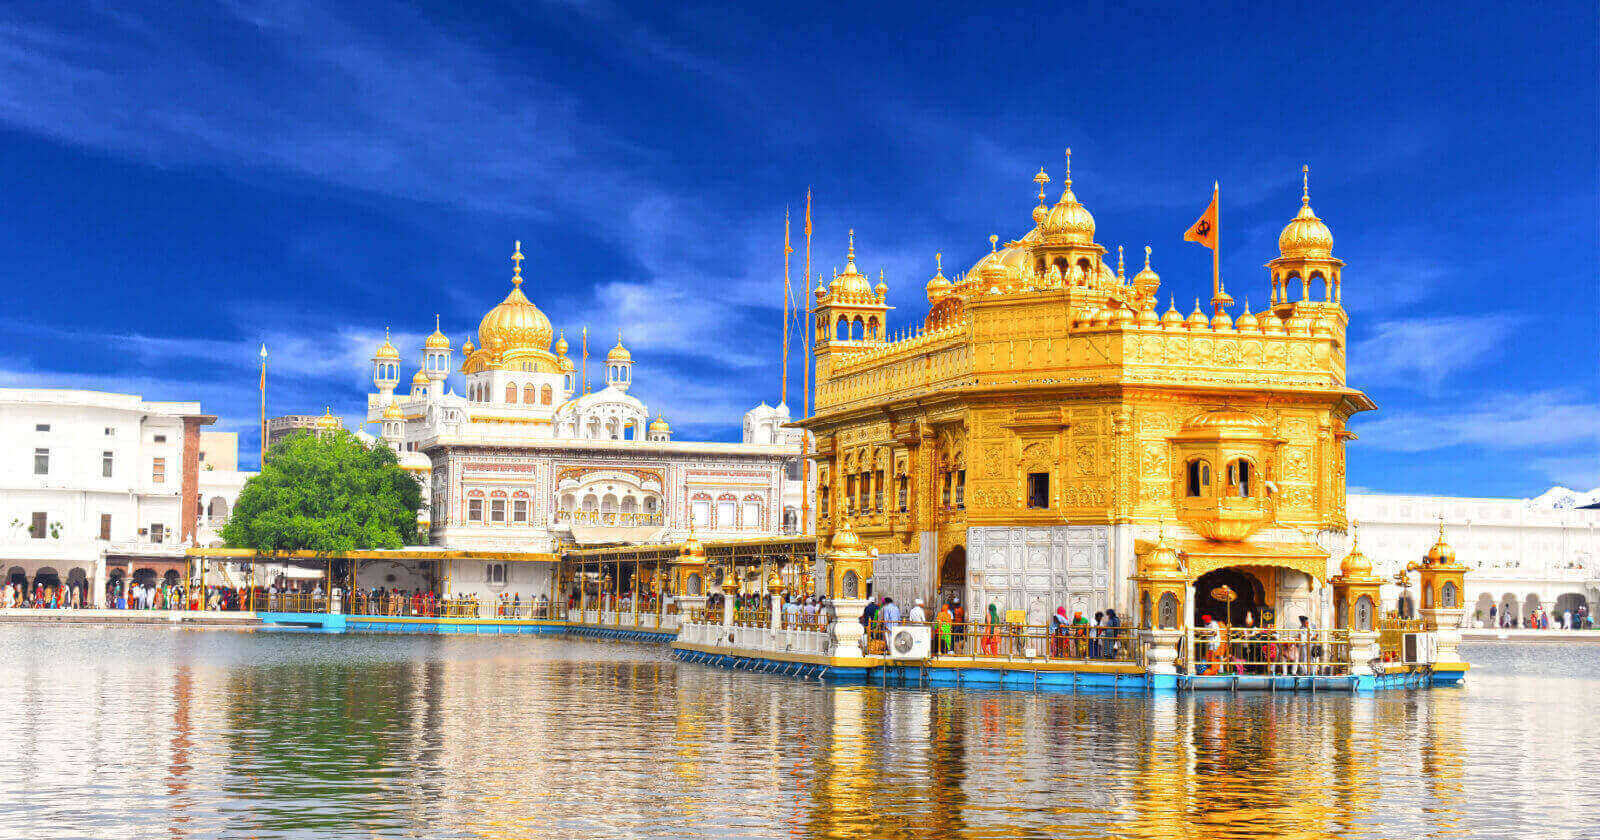  Best place to visit Amritsar